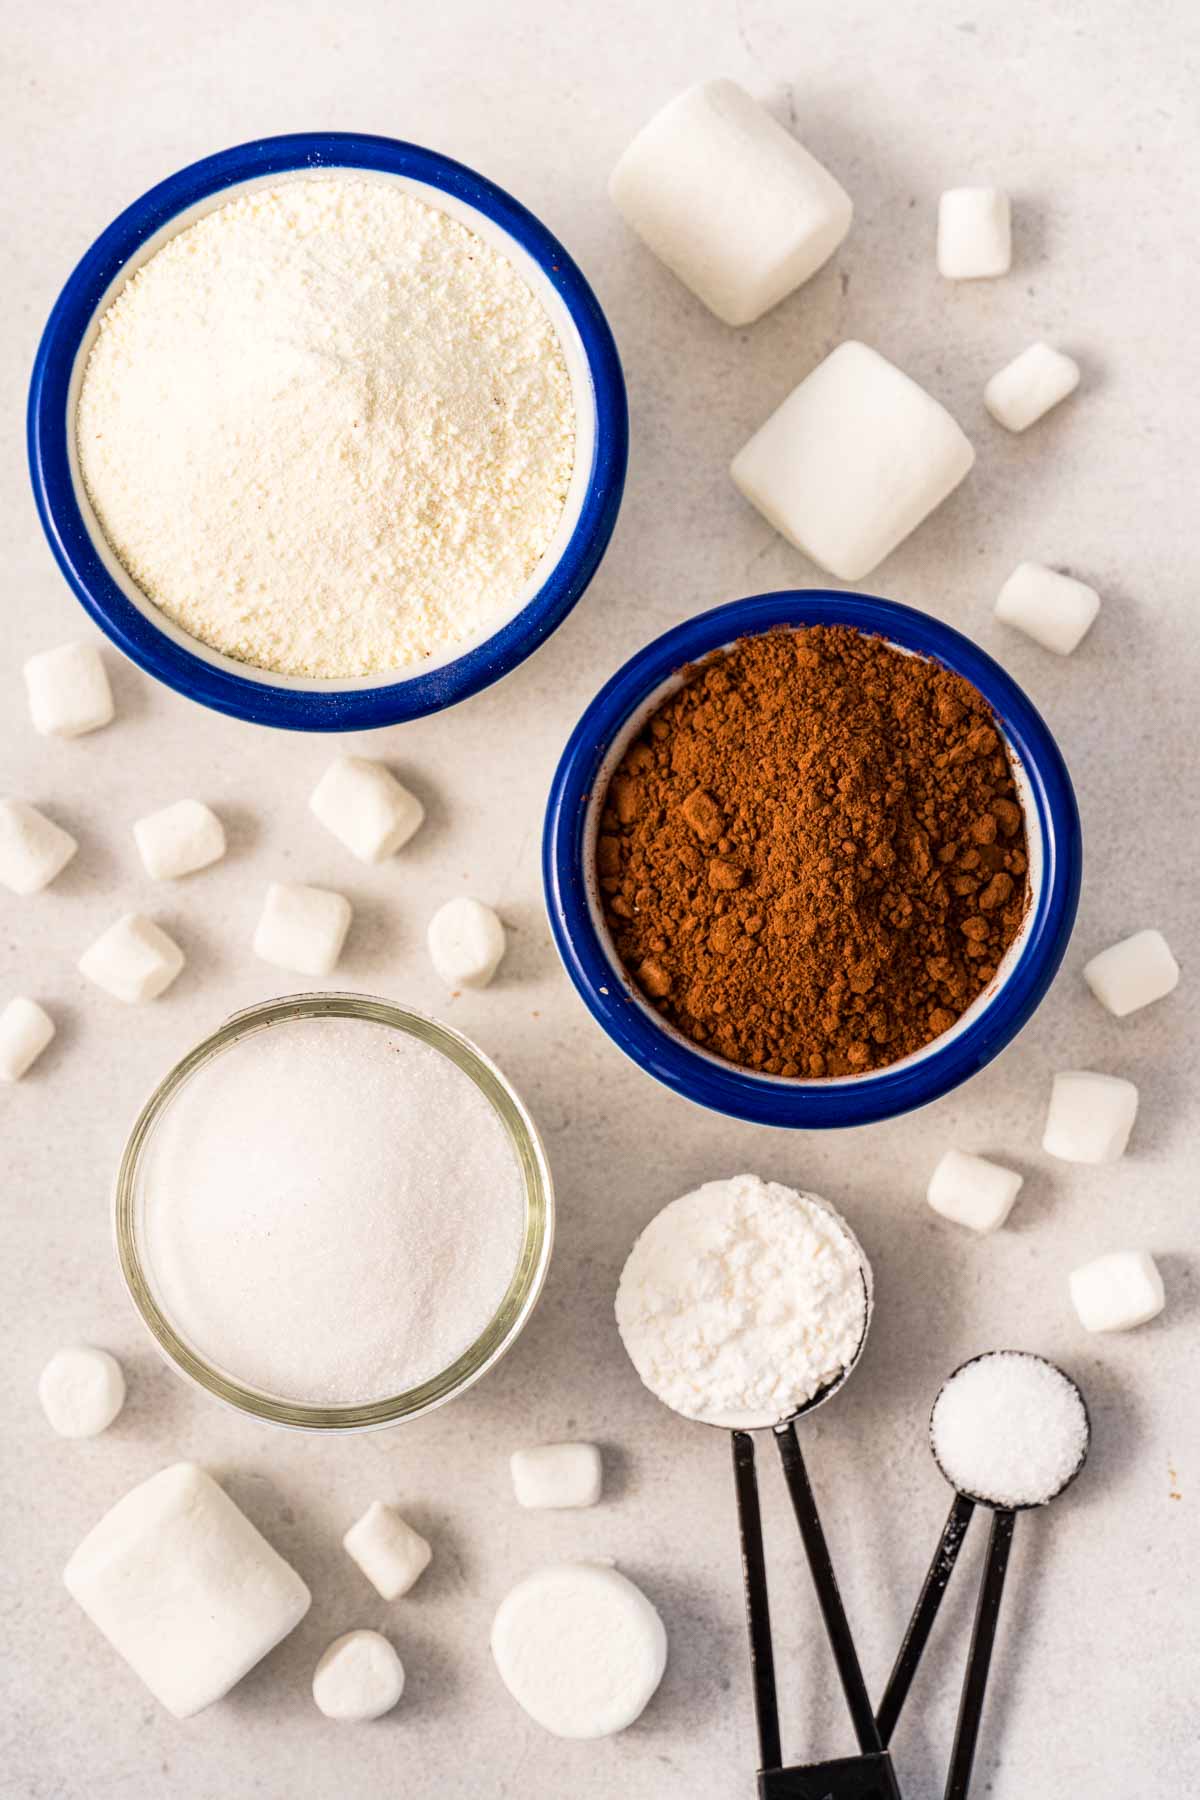 A top view of ingredients for DIY hot cocoa mix which are granulated sugar, dry milk (milk powder), unsweetened cocoa powder, cornstarch, and fine salt. Dehydrated marshmallows are also on display for topping the hot cocoa.